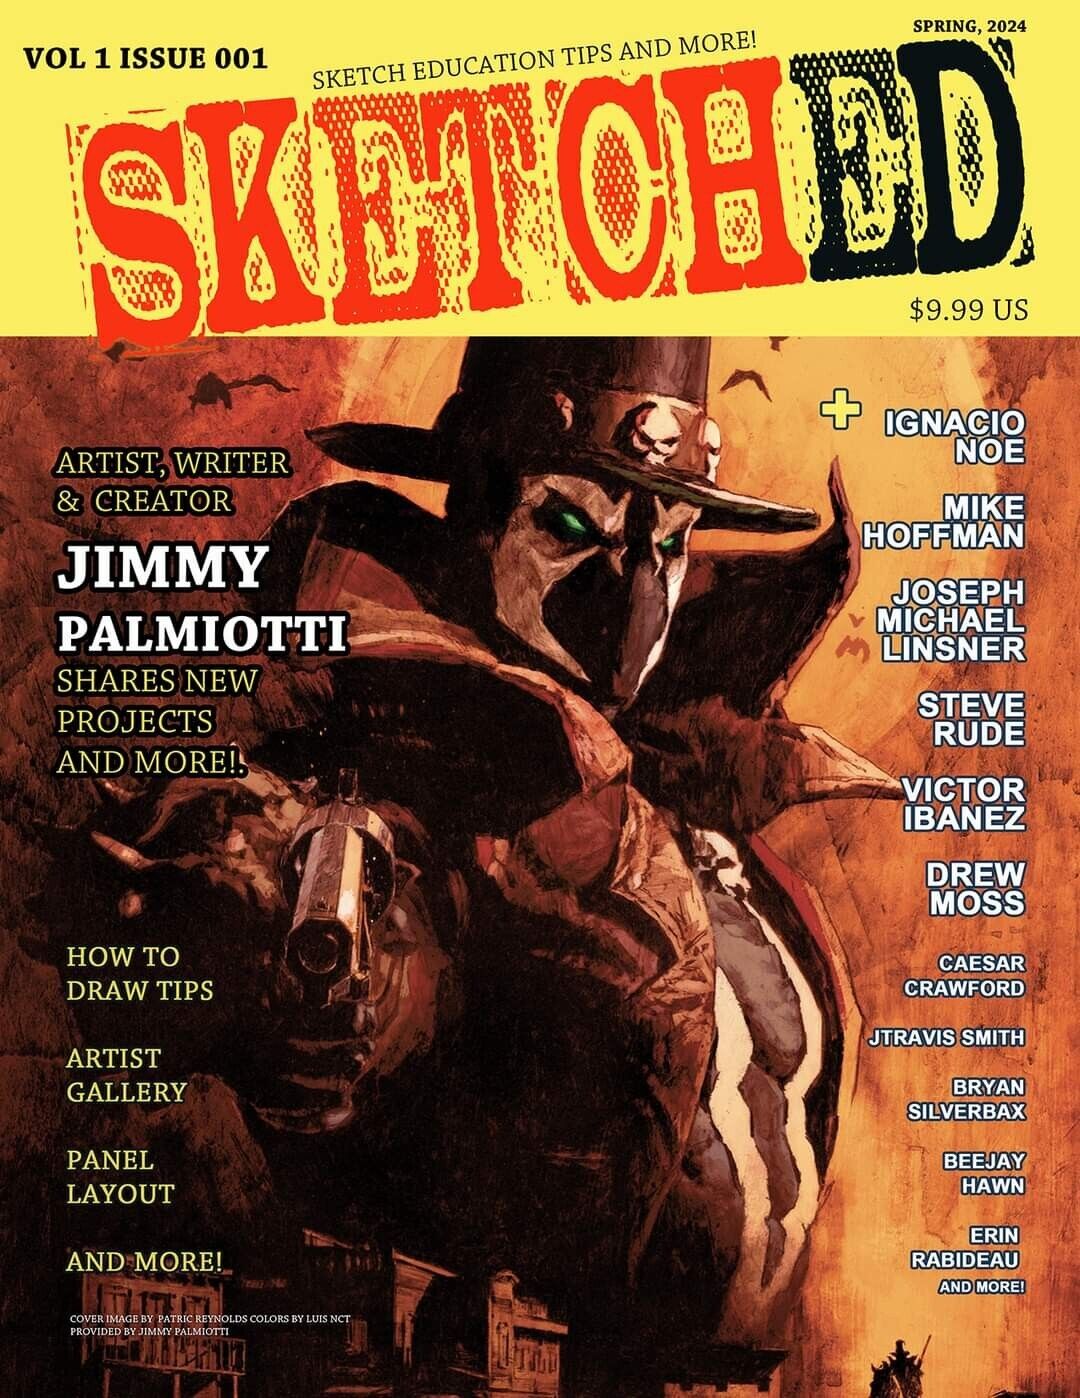 SPAWN 🔥 SKETCHED MAGAZINE 001...DIGITAL DOWNLOAD AVAILABLE NOW 64pages